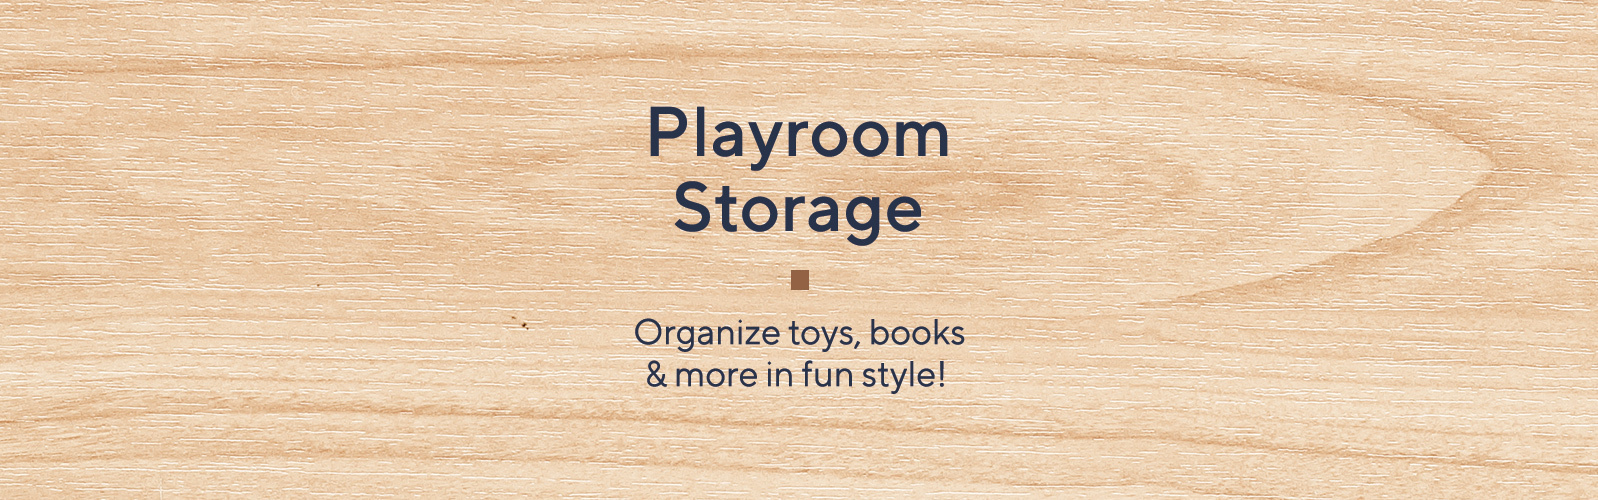 Playroom Storage  Organize toys, books & more in fun style! 